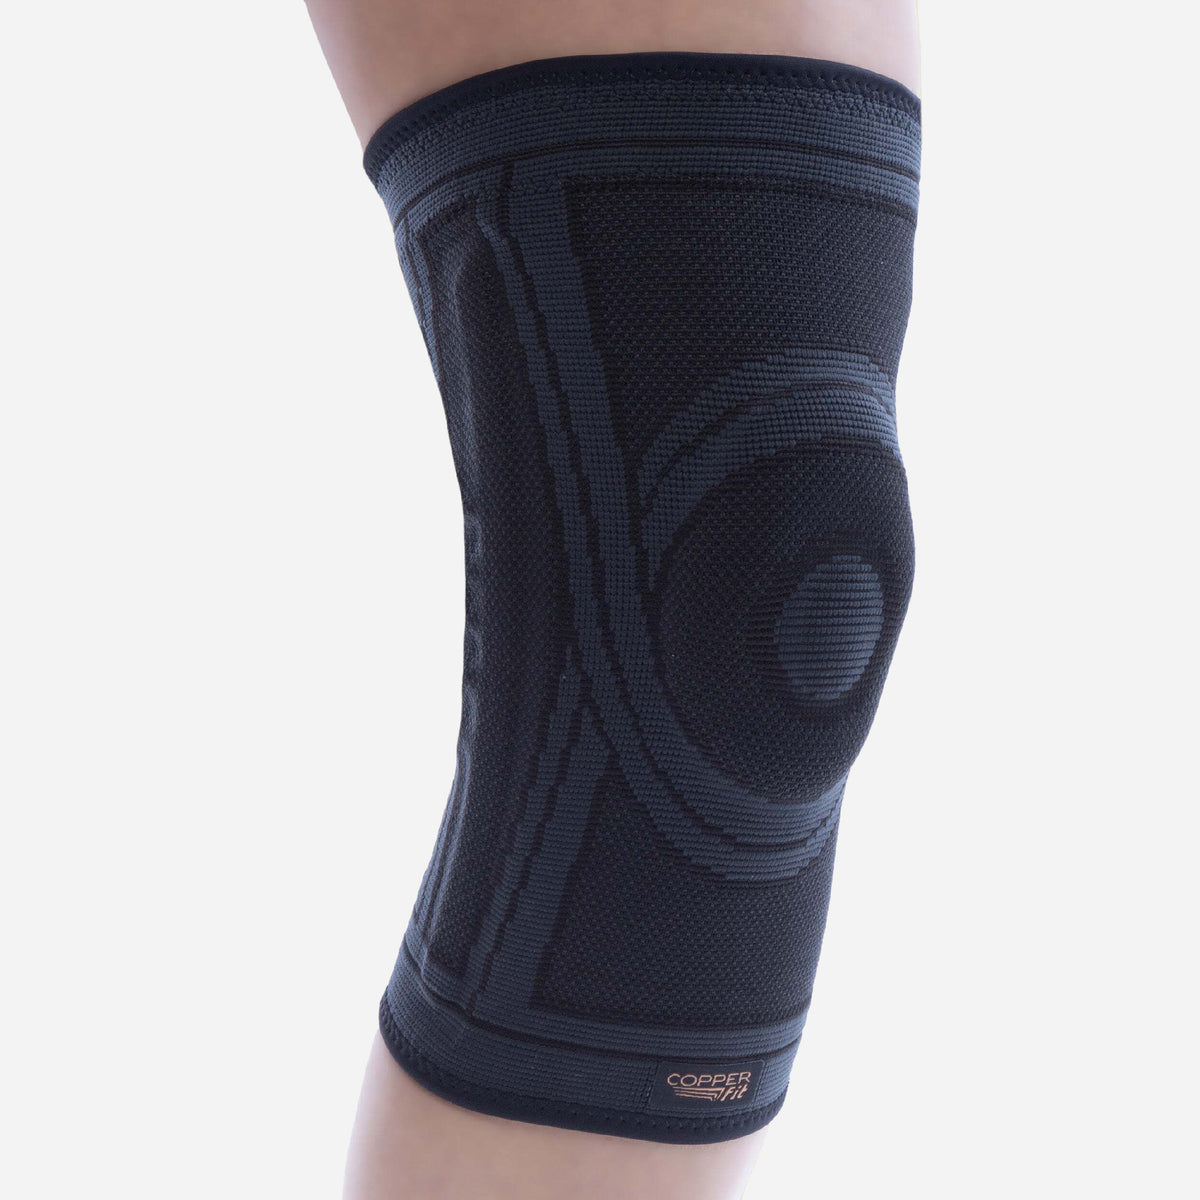 Copper Knee Support for Women/Men - Knee Brace Compression Sleeve Support  with Patella Gel Pad & Side Stabilizers, Knee Sleeves Knee Braces for